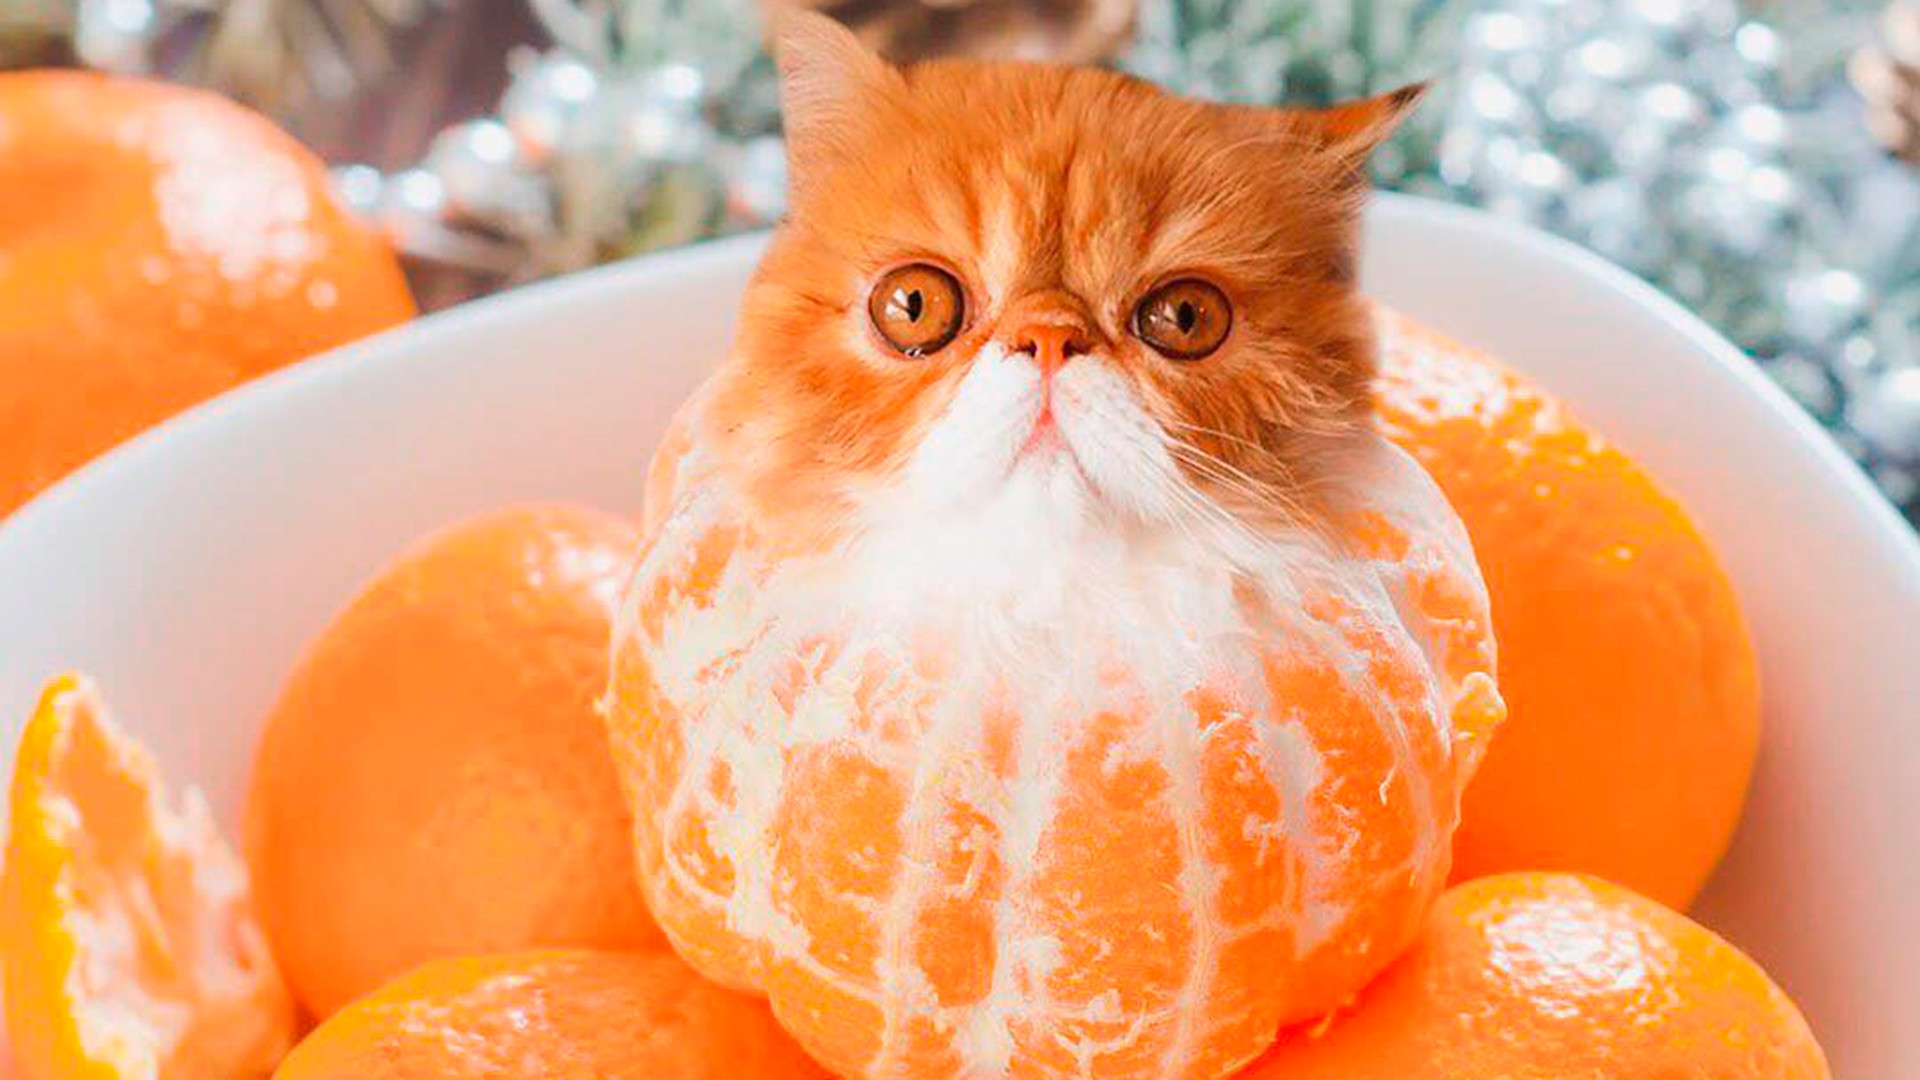 Cats in cake: This Russian artist is mixing felines and food (PHOTOS